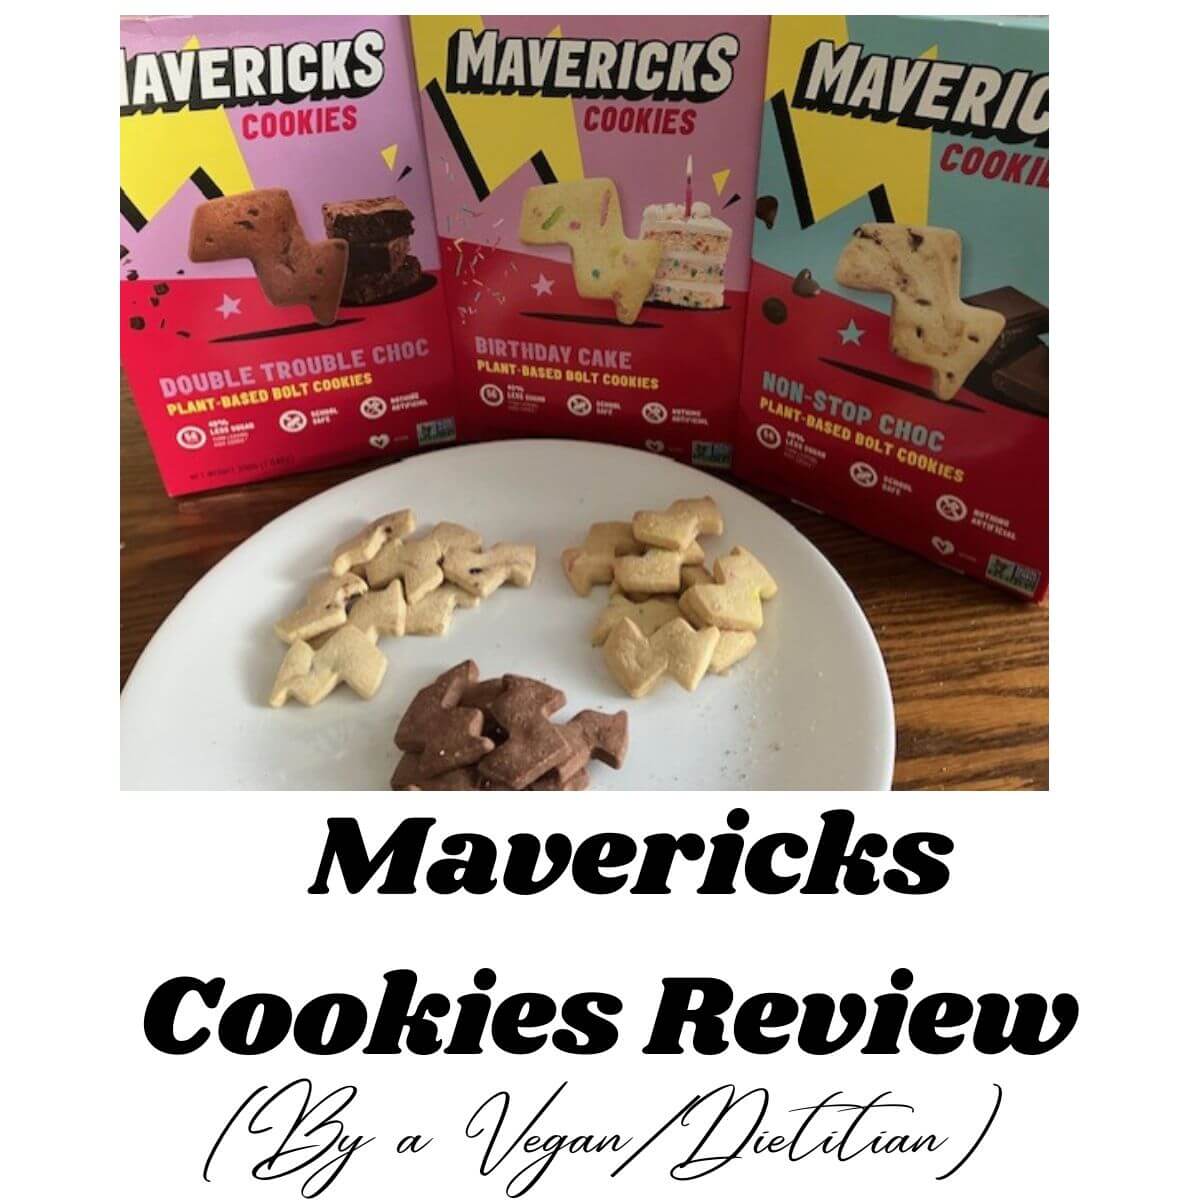 Picture of Mavericks cookie packages, with some of the cookies on a plate. Text reads: Mavericks Cookies Review (By a Vegan/ Dietitian).